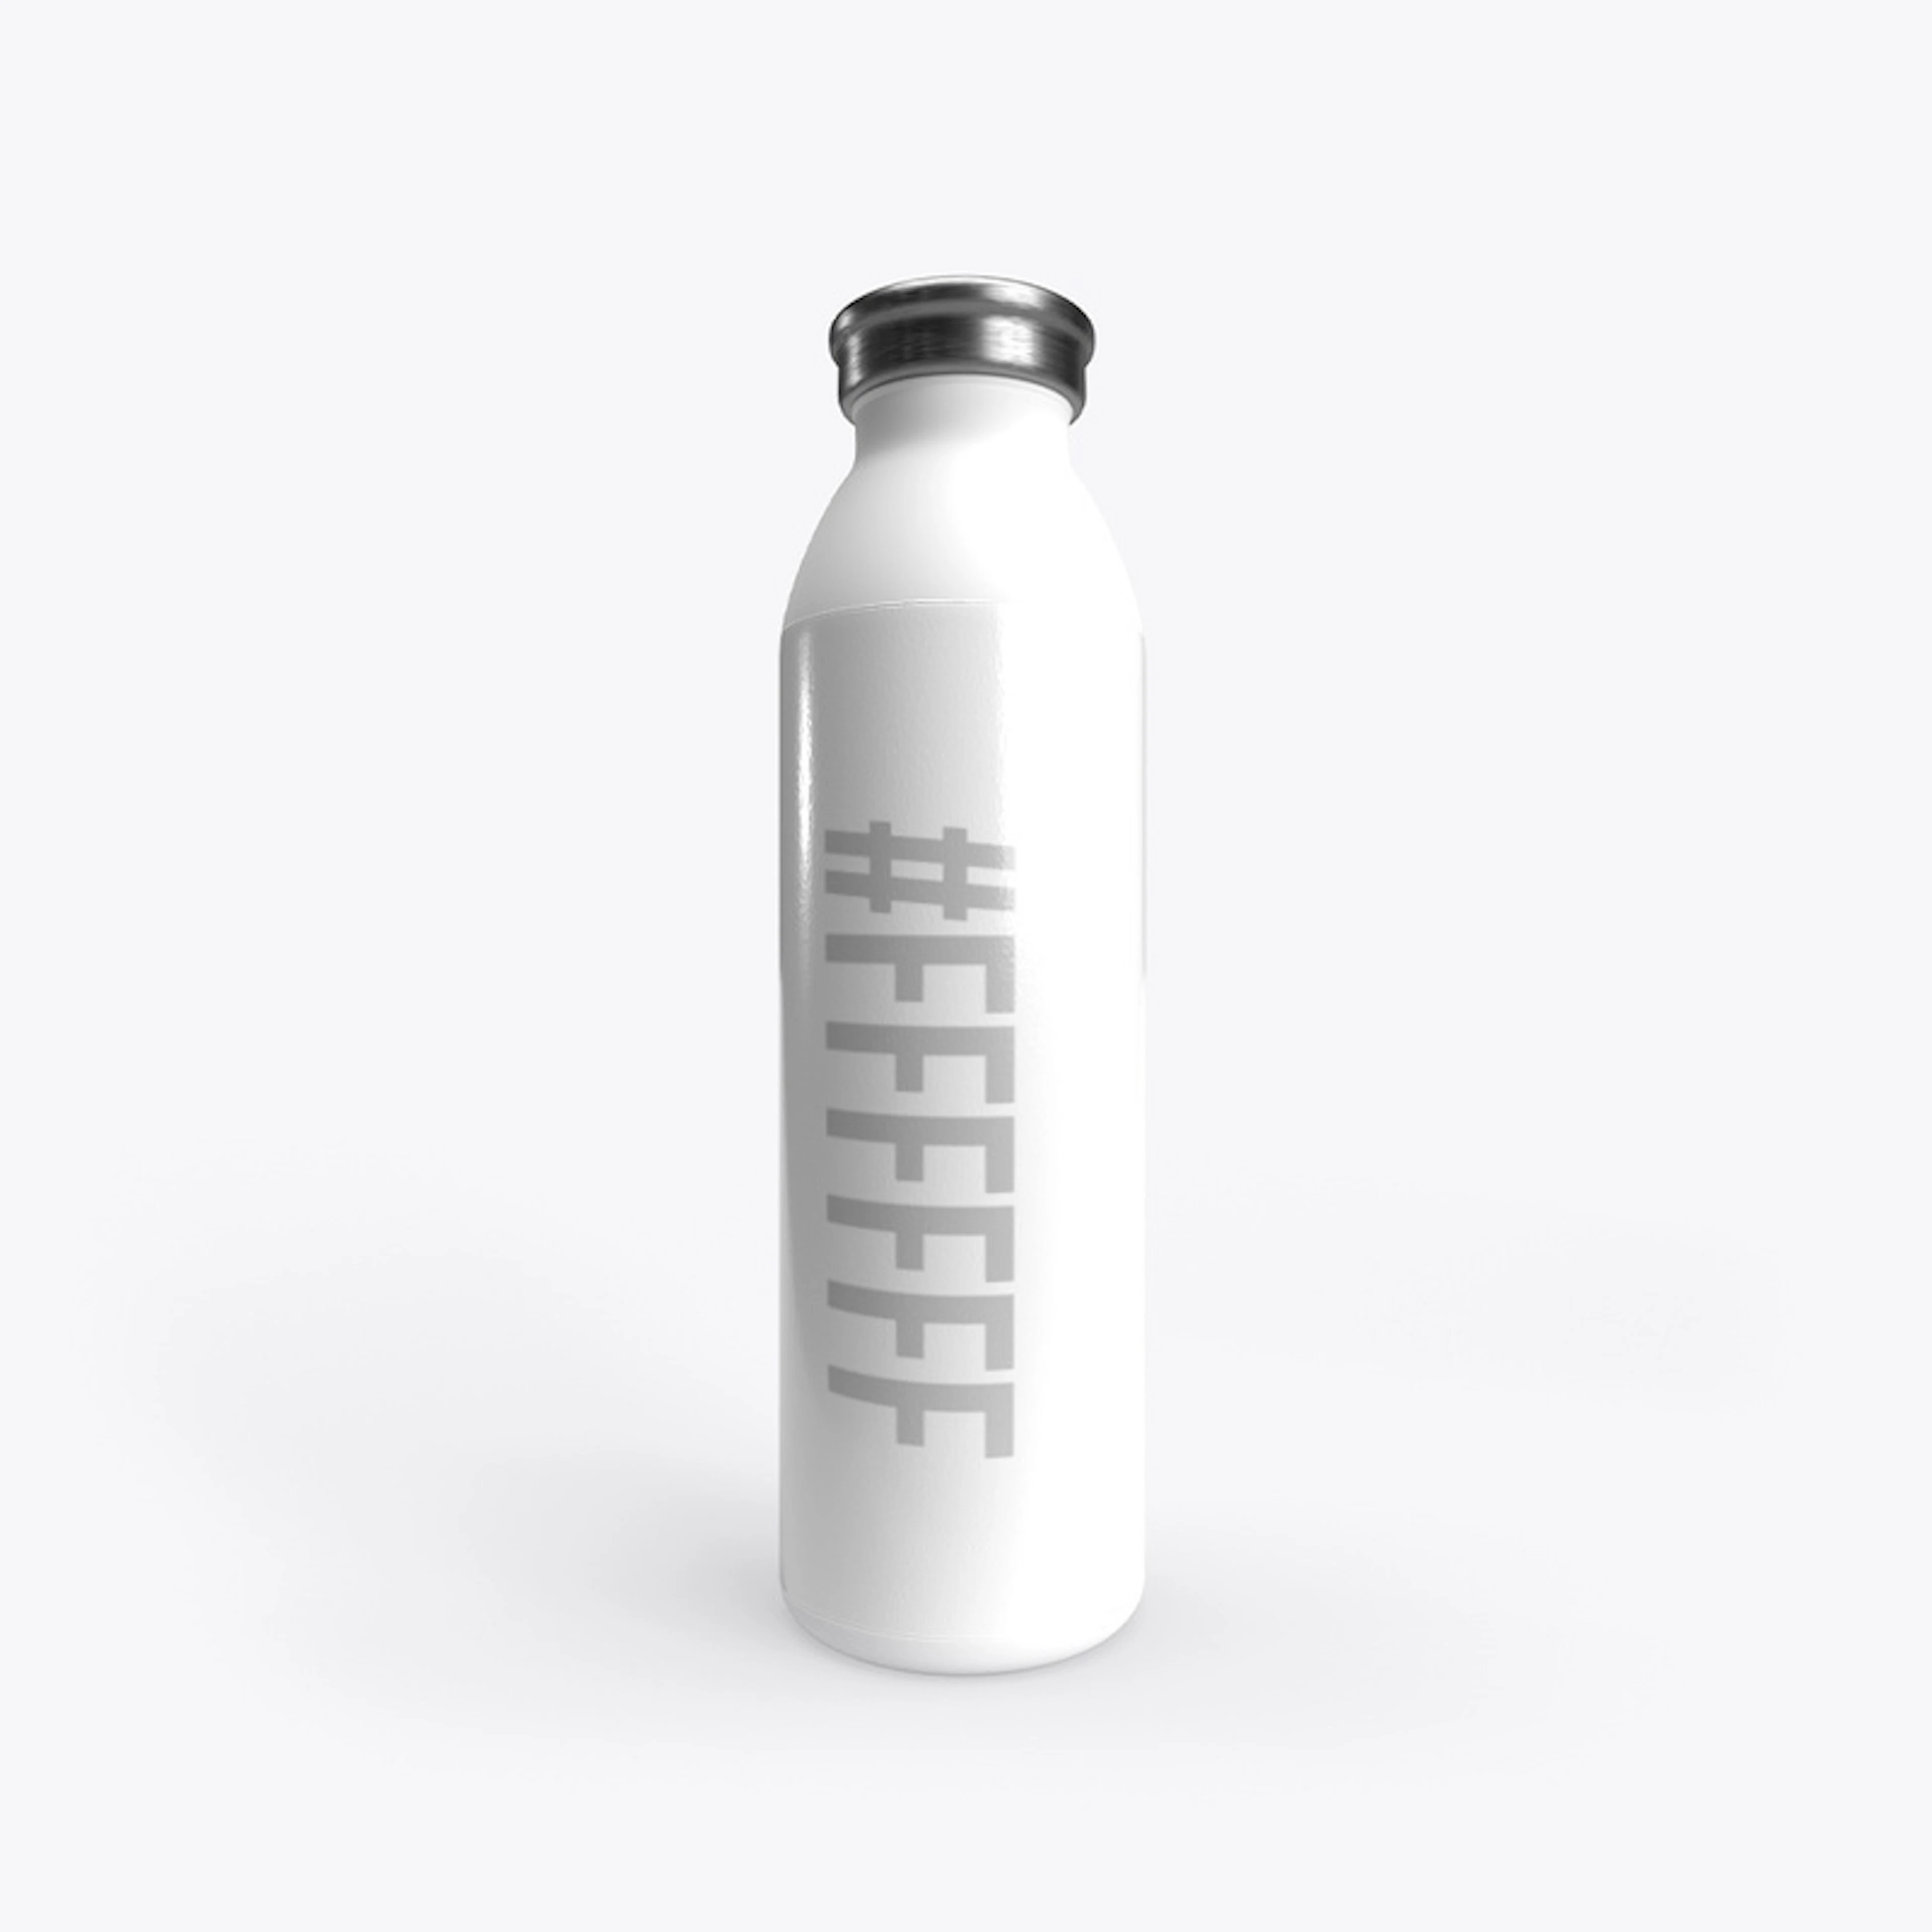 Graphic Designers: "White" Water Bottle